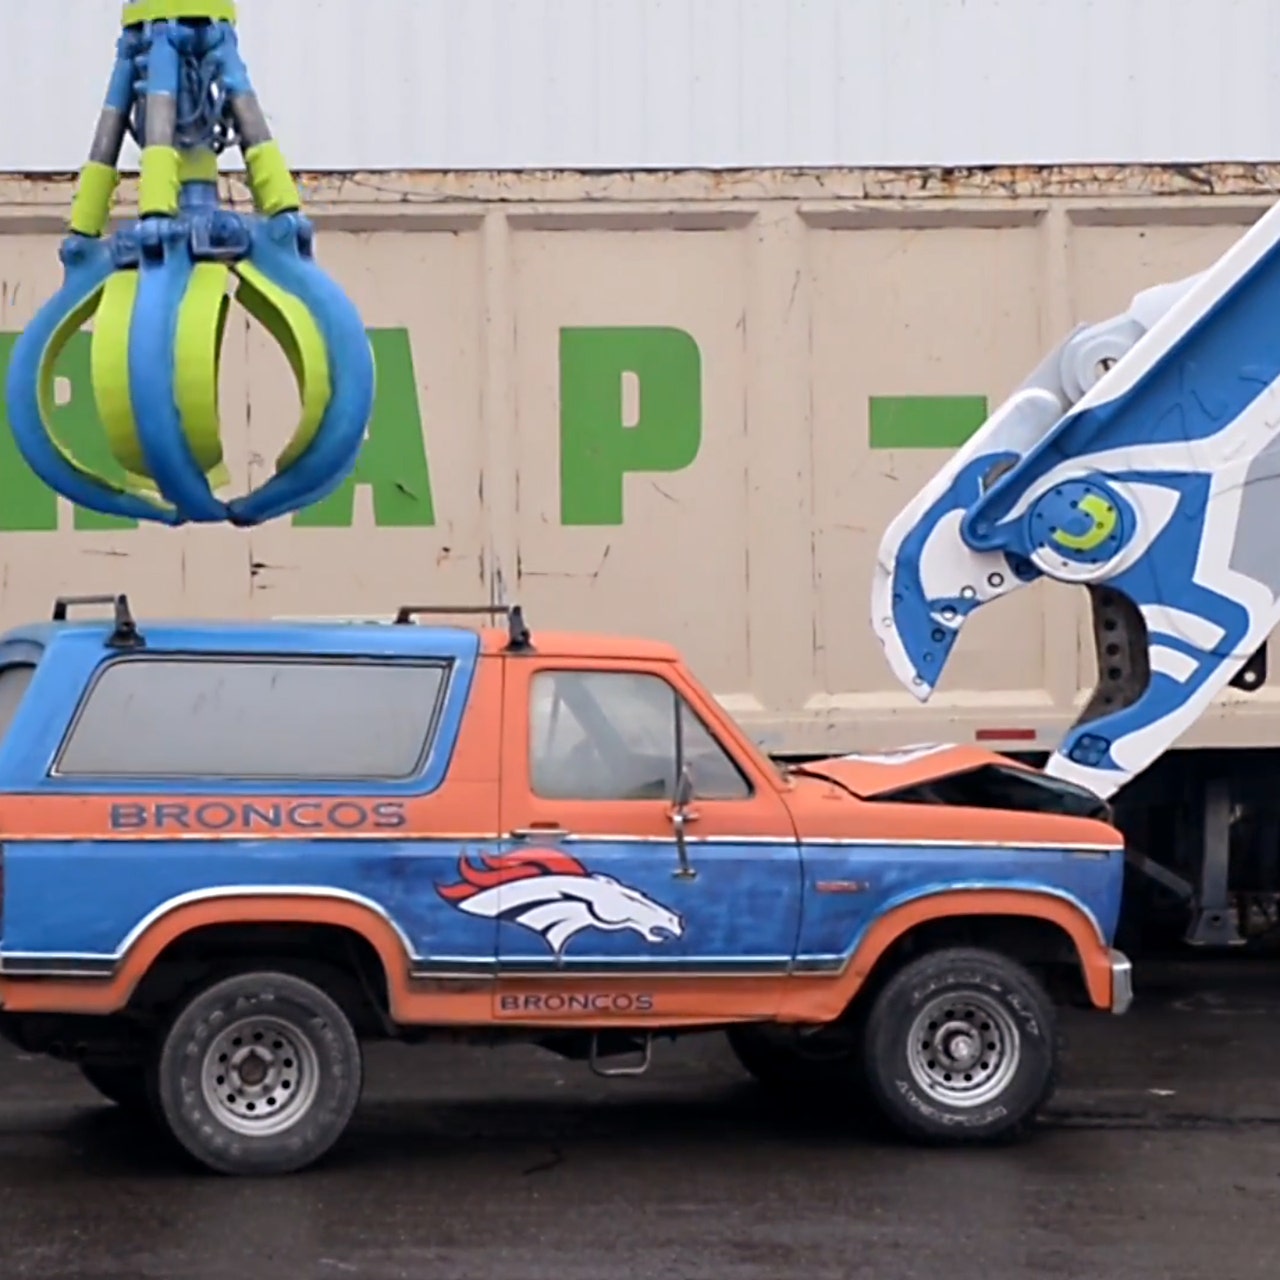 Seahawks supporters smash Ford Bronco in Super Bowl tune-up